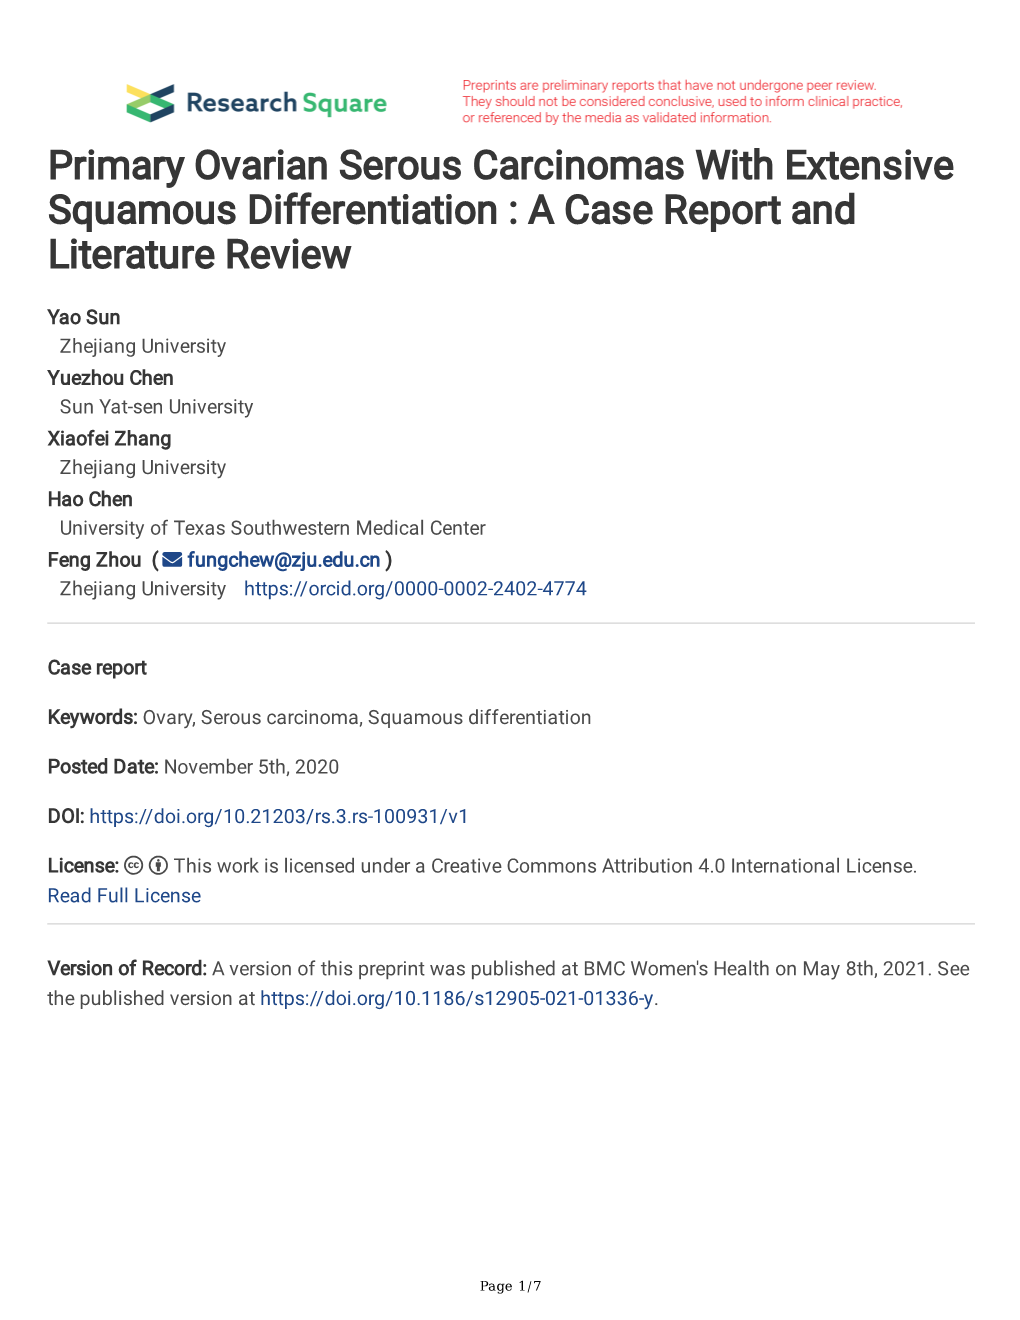 Primary Ovarian Serous Carcinomas with Extensive Squamous Differentiation : a Case Report and Literature Review